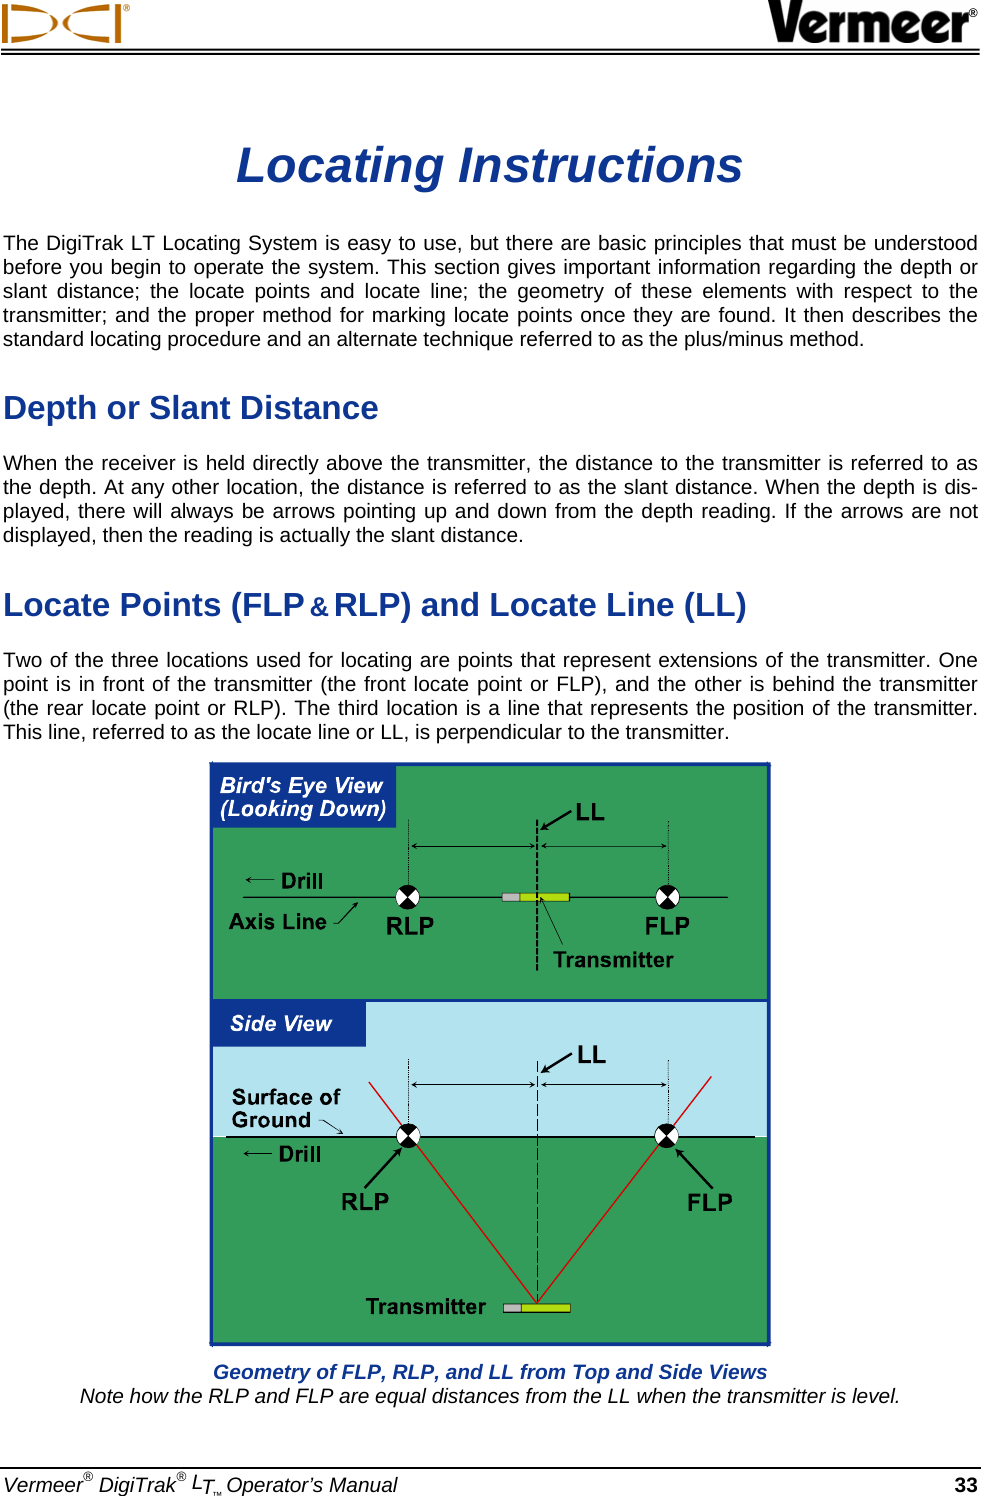  ® Vermeer® DigiTrak® LT™ Operator’s Manual 33 Locating Instructions The DigiTrak LT Locating System is easy to use, but there are basic principles that must be understood before you begin to operate the system. This section gives important information regarding the depth or slant distance; the locate points and locate line; the geometry of these elements with respect to the transmitter; and the proper method for marking locate points once they are found. It then describes the standard locating procedure and an alternate technique referred to as the plus/minus method. Depth or Slant Distance When the receiver is held directly above the transmitter, the distance to the transmitter is referred to as the depth. At any other location, the distance is referred to as the slant distance. When the depth is dis-played, there will always be arrows pointing up and down from the depth reading. If the arrows are not displayed, then the reading is actually the slant distance. Locate Points (FLP &amp; RLP) and Locate Line (LL) Two of the three locations used for locating are points that represent extensions of the transmitter. One point is in front of the transmitter (the front locate point or FLP), and the other is behind the transmitter (the rear locate point or RLP). The third location is a line that represents the position of the transmitter. This line, referred to as the locate line or LL, is perpendicular to the transmitter.    Geometry of FLP, RLP, and LL from Top and Side Views  Note how the RLP and FLP are equal distances from the LL when the transmitter is level. 